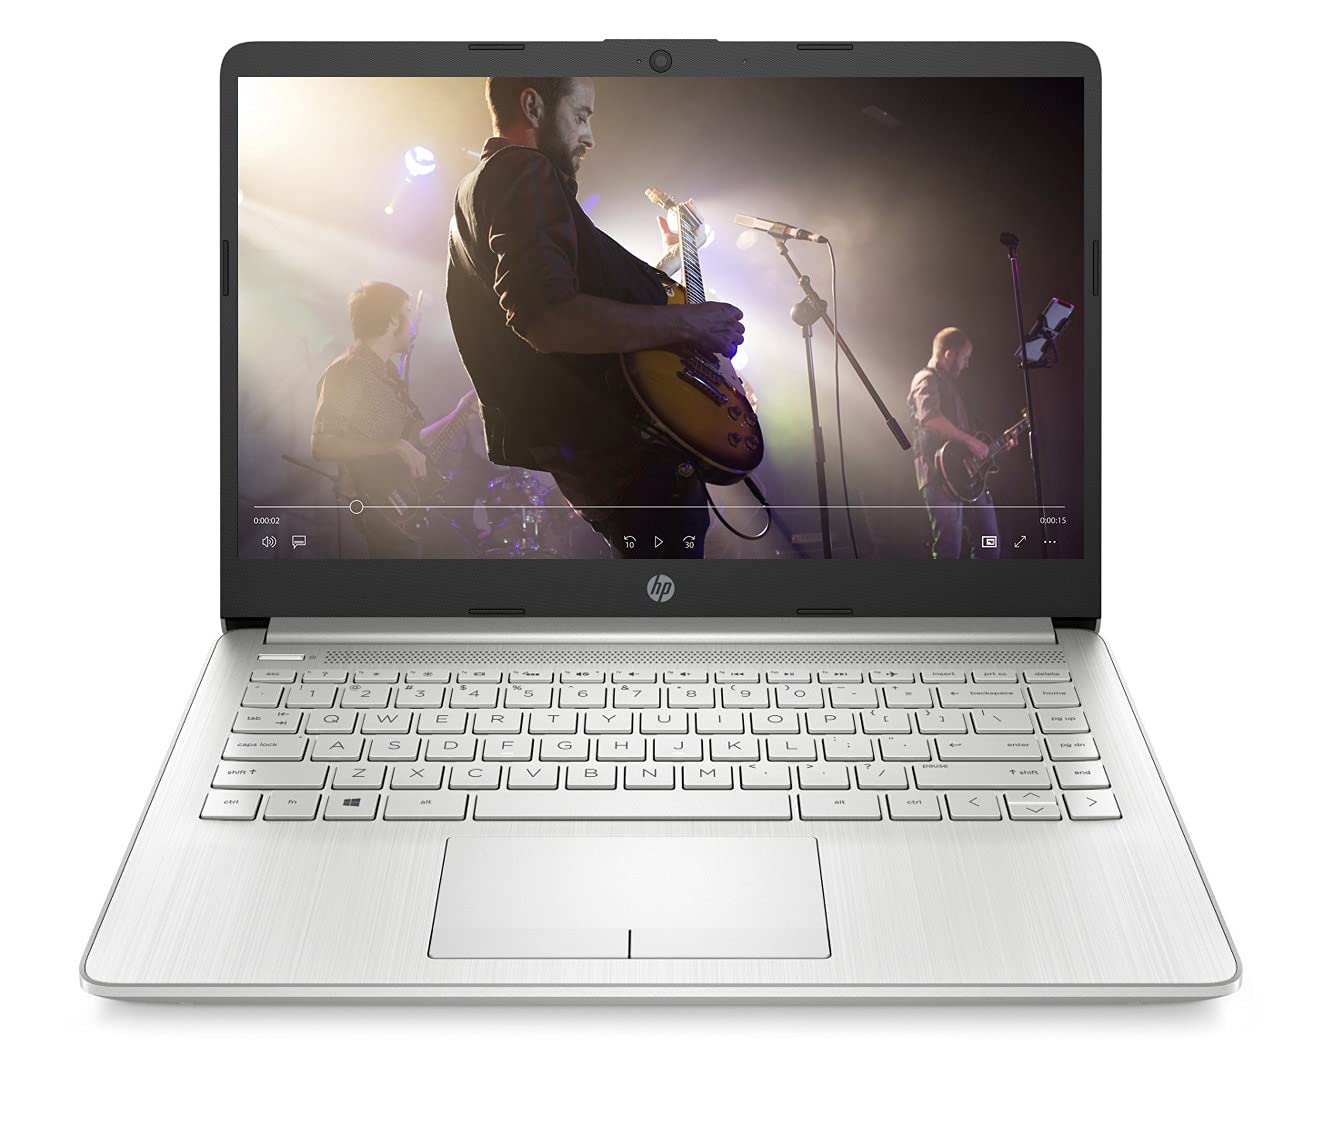 Amazon Festival Sale: Know About HP 14 10th Gen Laptop Available At Discount Of Up To Rs 15,000